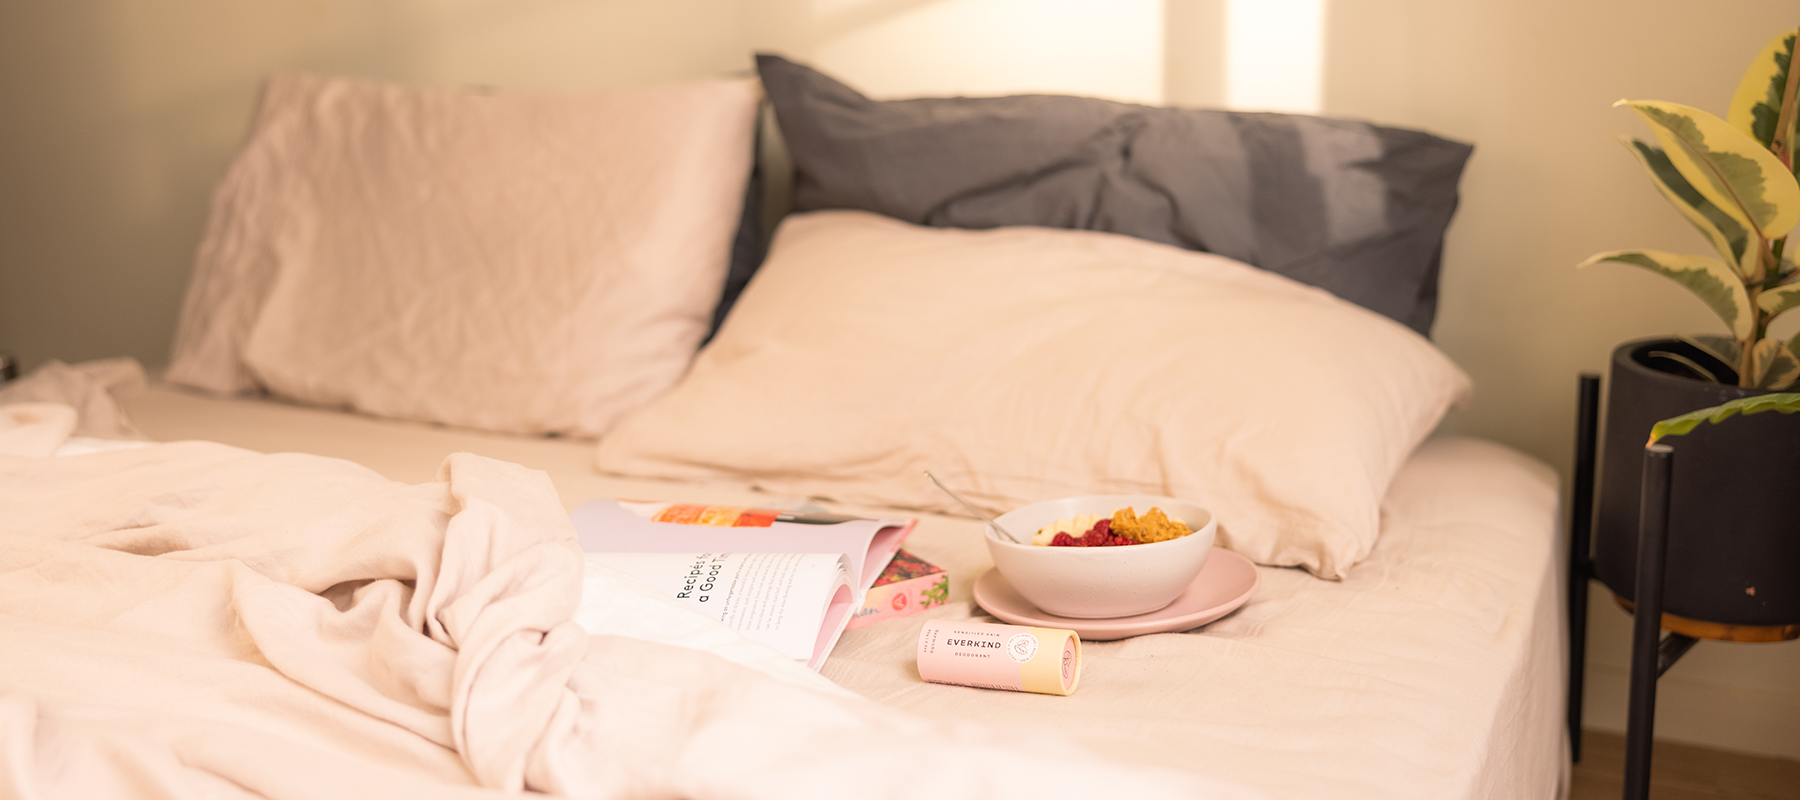 Photo linen bed with health breakfast, selfcare journal, and Everkind organic deodorant.